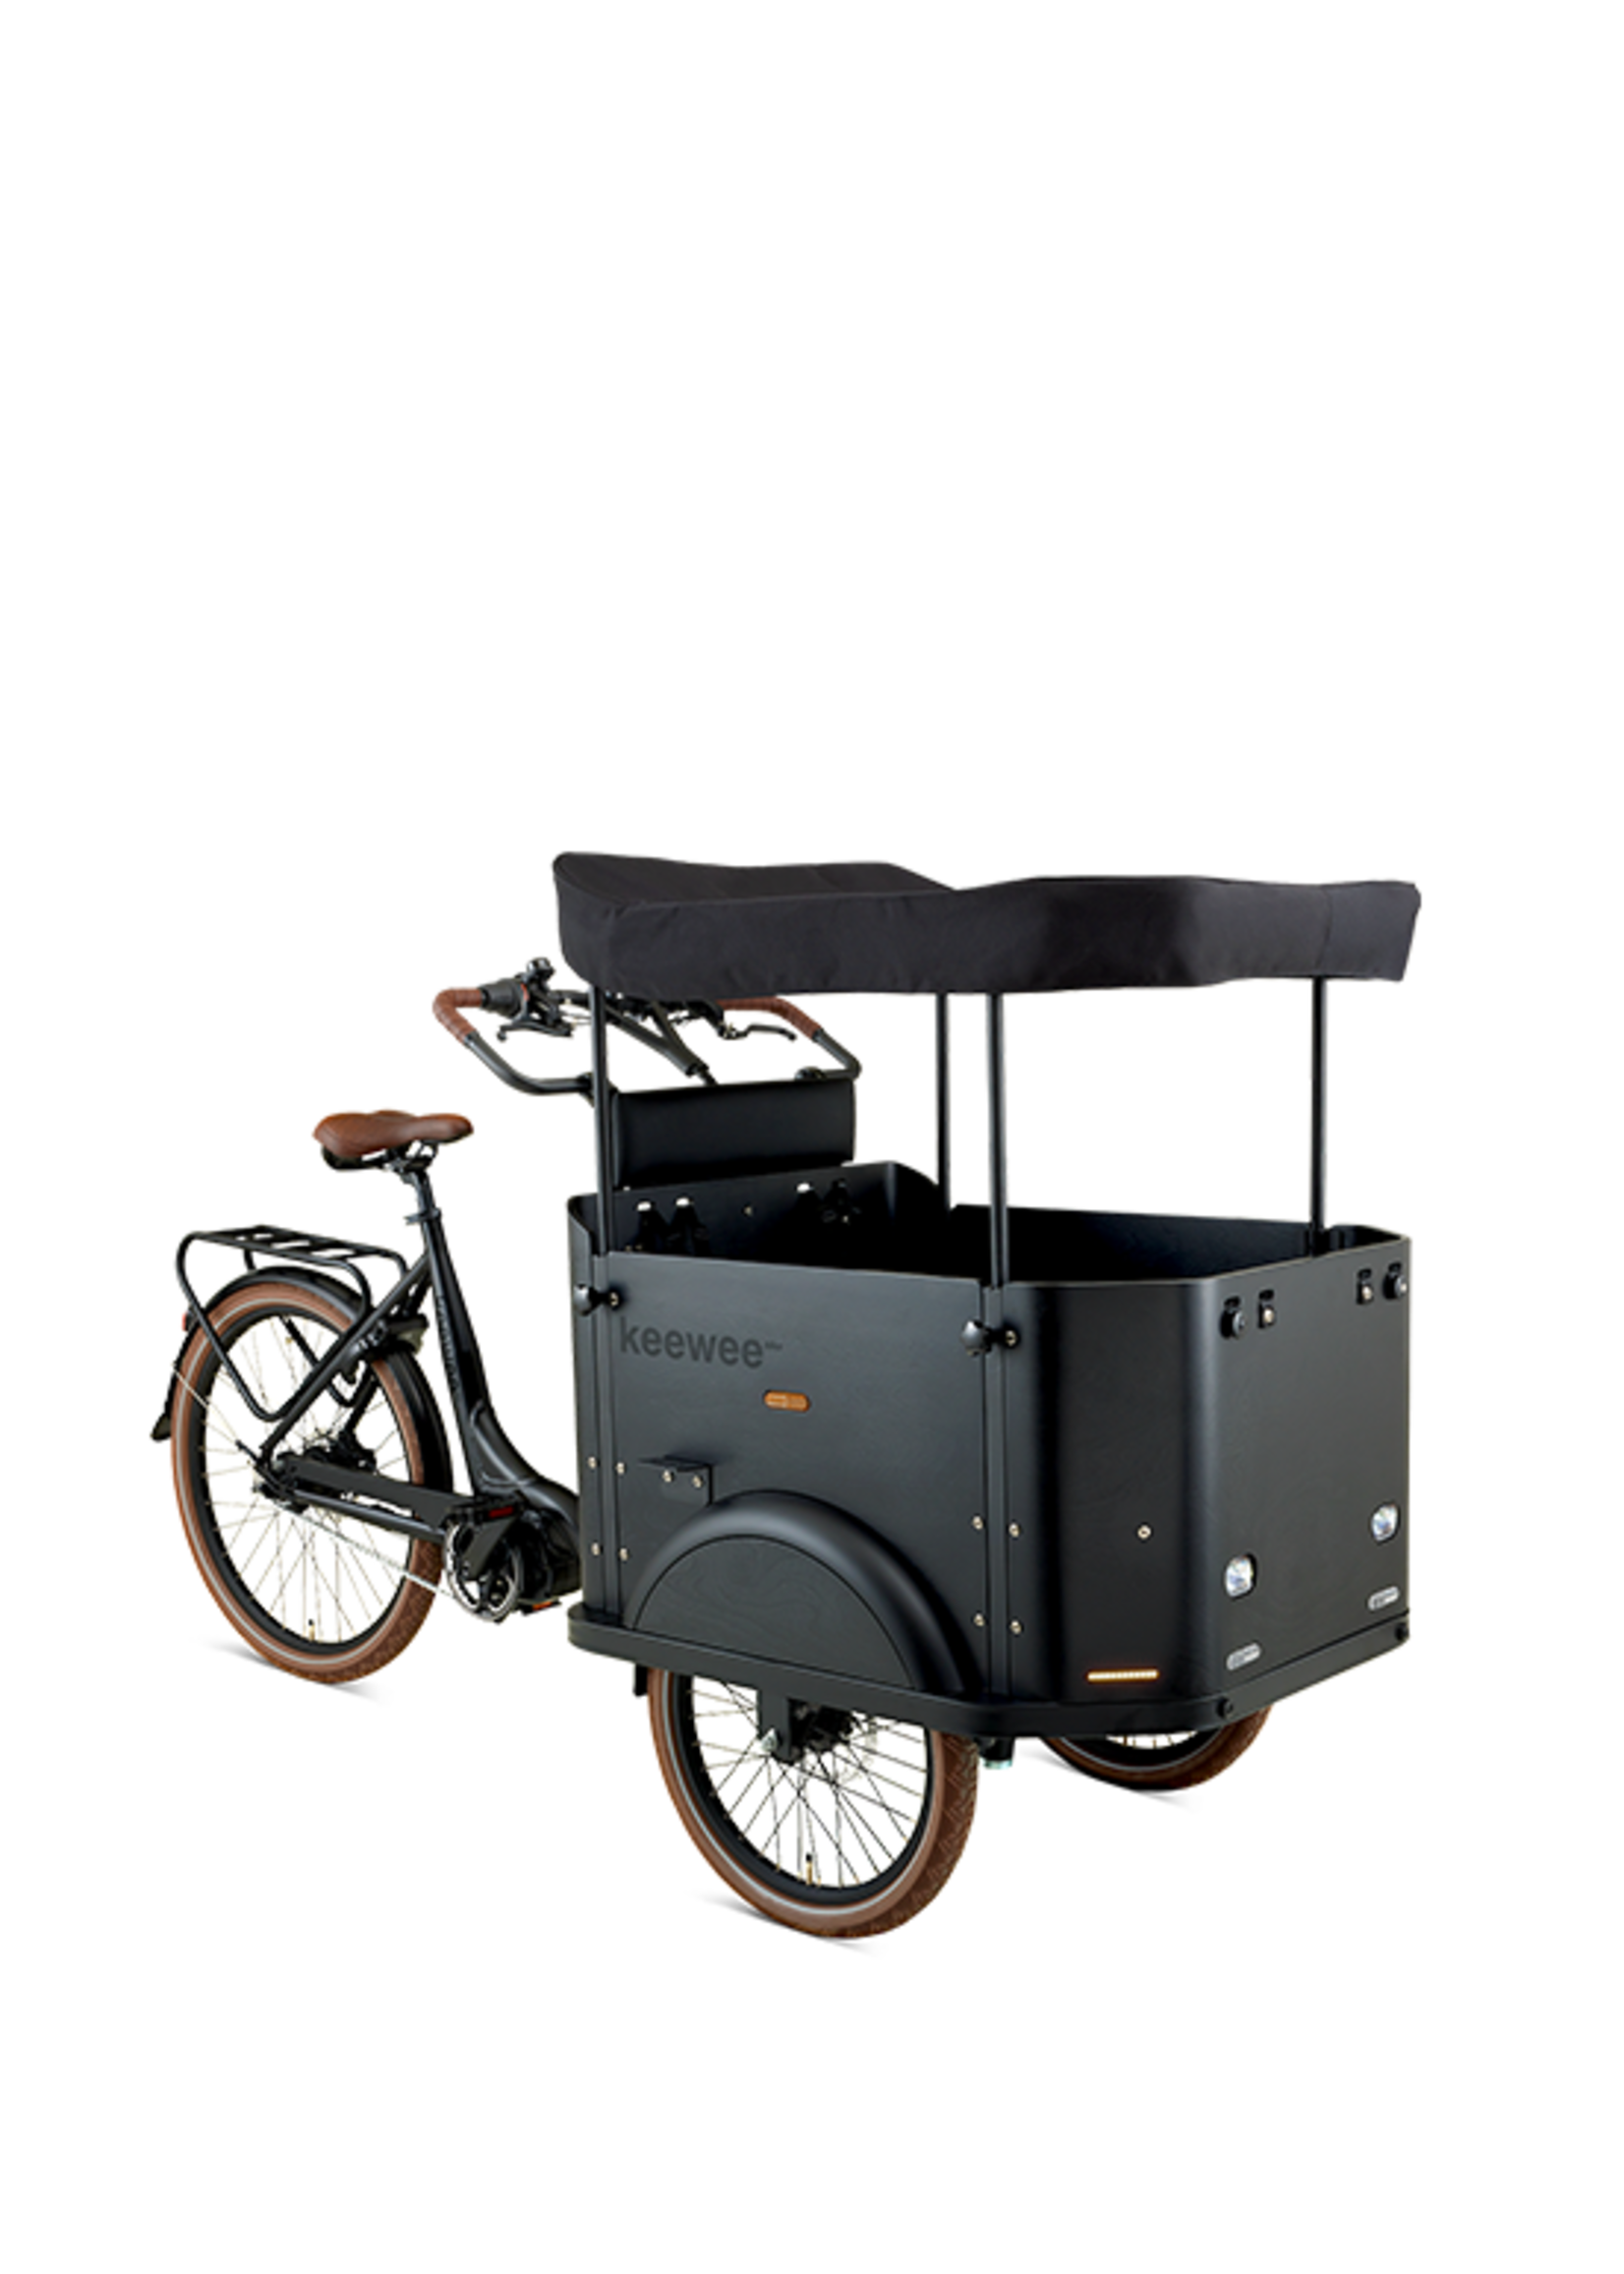 THIS WEEKEND THE CHEAPEST IN THE NETHERLANDS! Keewee cargo bike